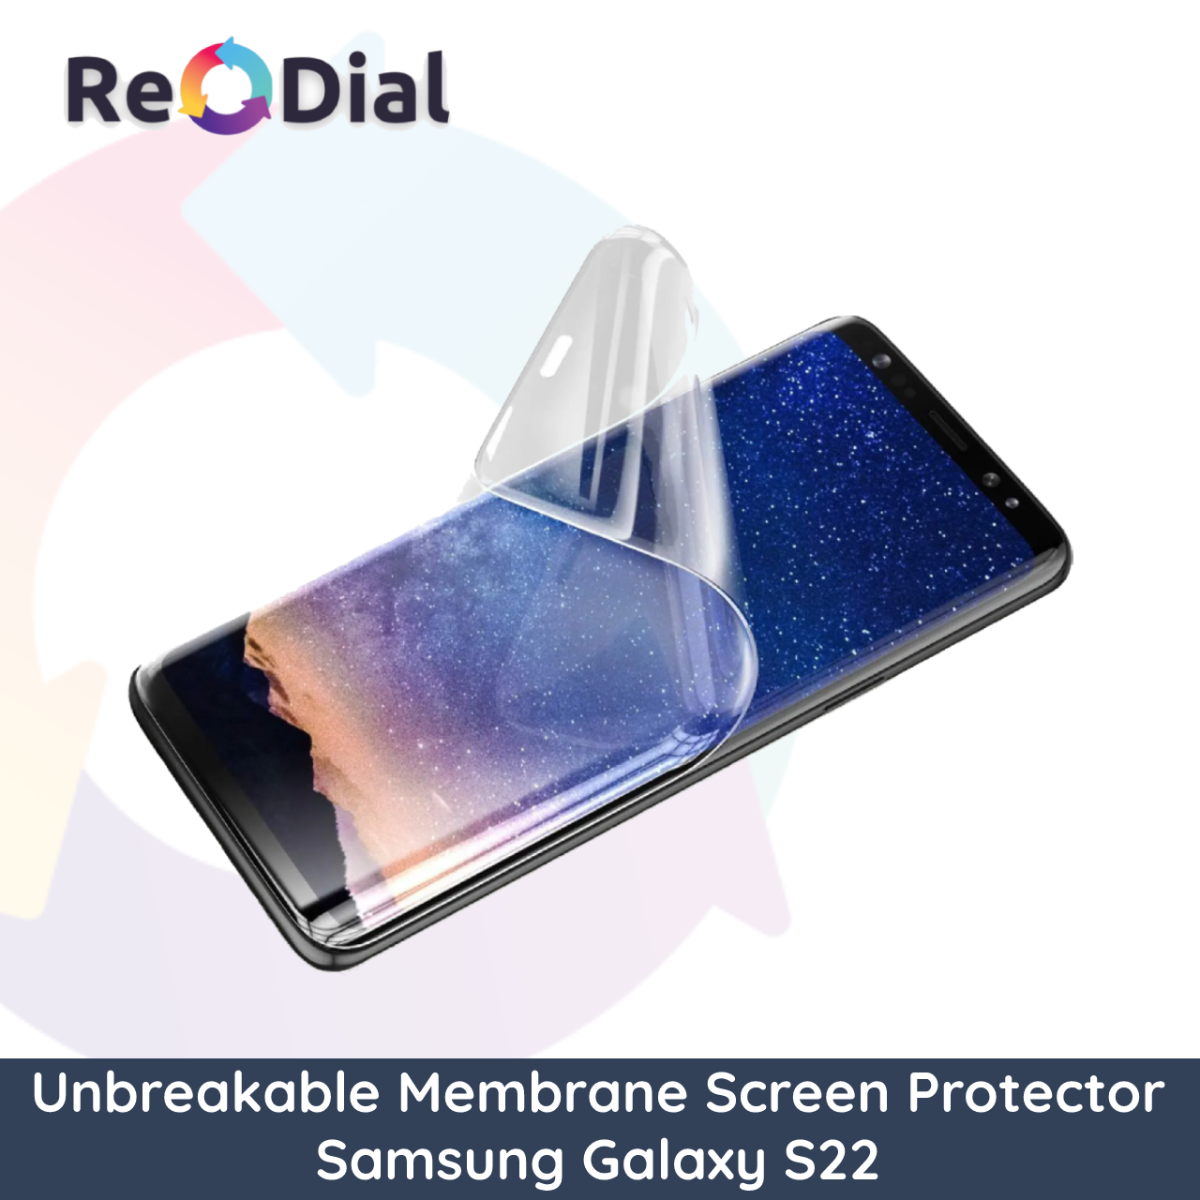 Unbreakable Membrane Screen Protector For Samsung Galaxy S22